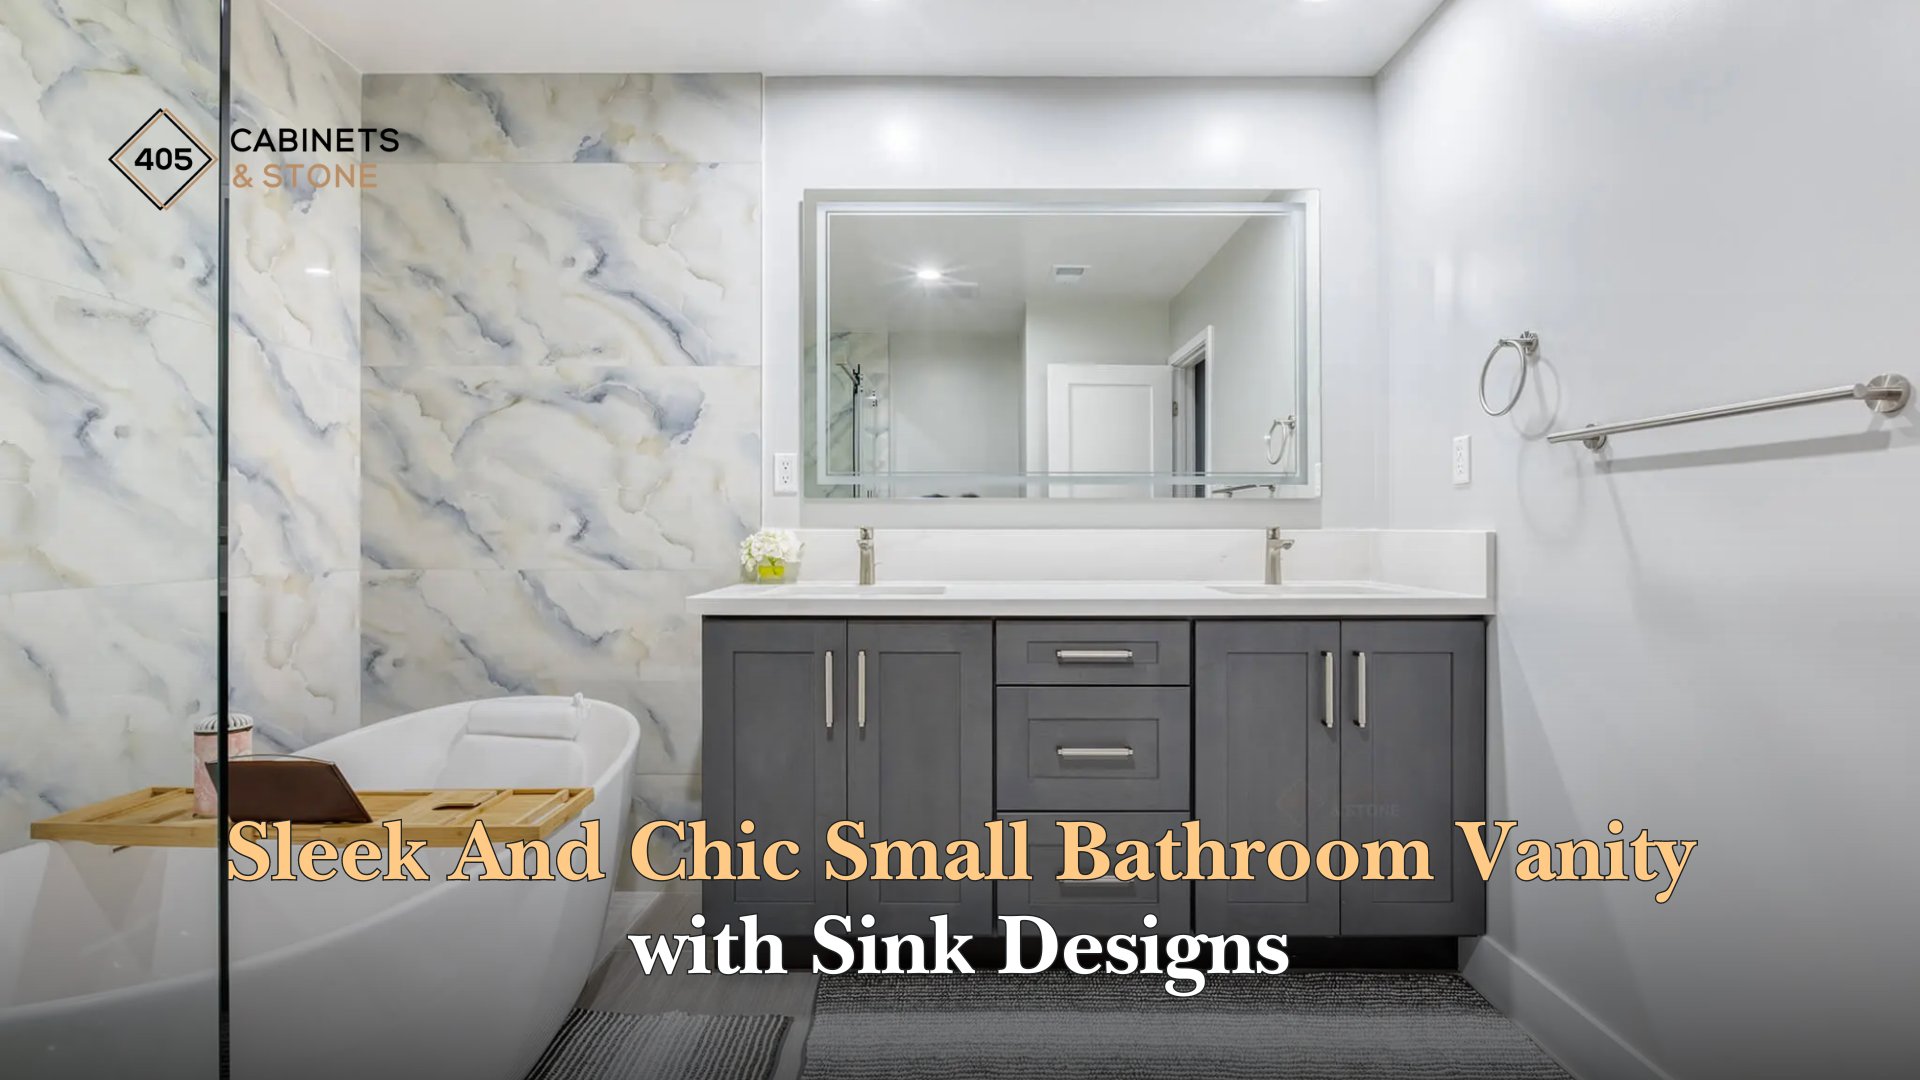 Small Bathroom Vanity With Sink Ideas with Minimalist Designs  Limited space can cause a great deal of frustration in trying to achieve the bathroom of your dreams. However, with the right vanity, it is possible to completely transform your bathroom into an aesthetic haven.